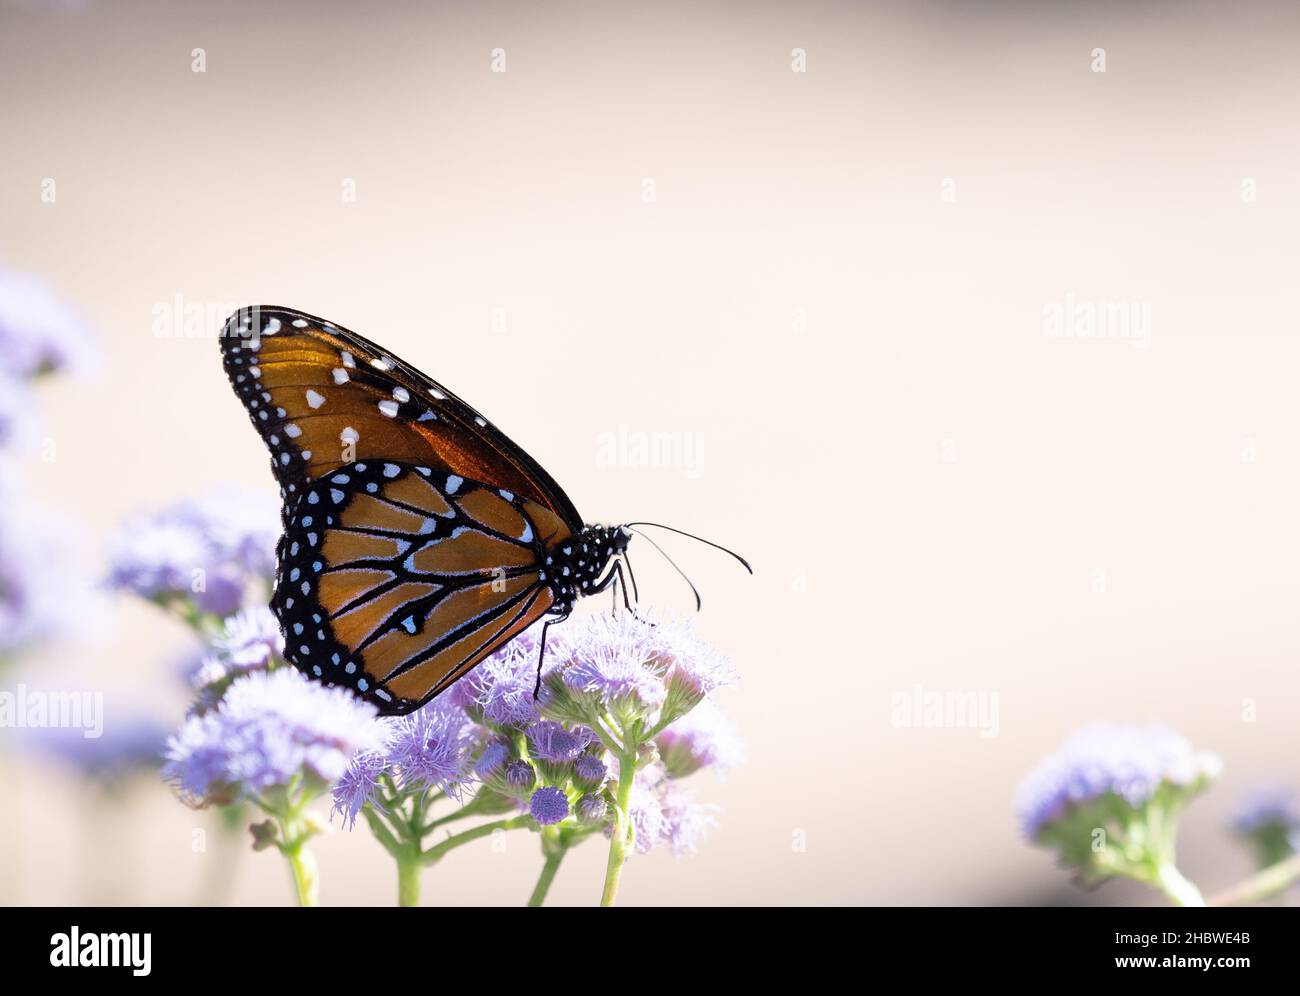 Monarch butterfly in profile with wings closed, perched on lavendar flowers and photographed at eye level with a shallow depth of field. Image has cop Stock Photo